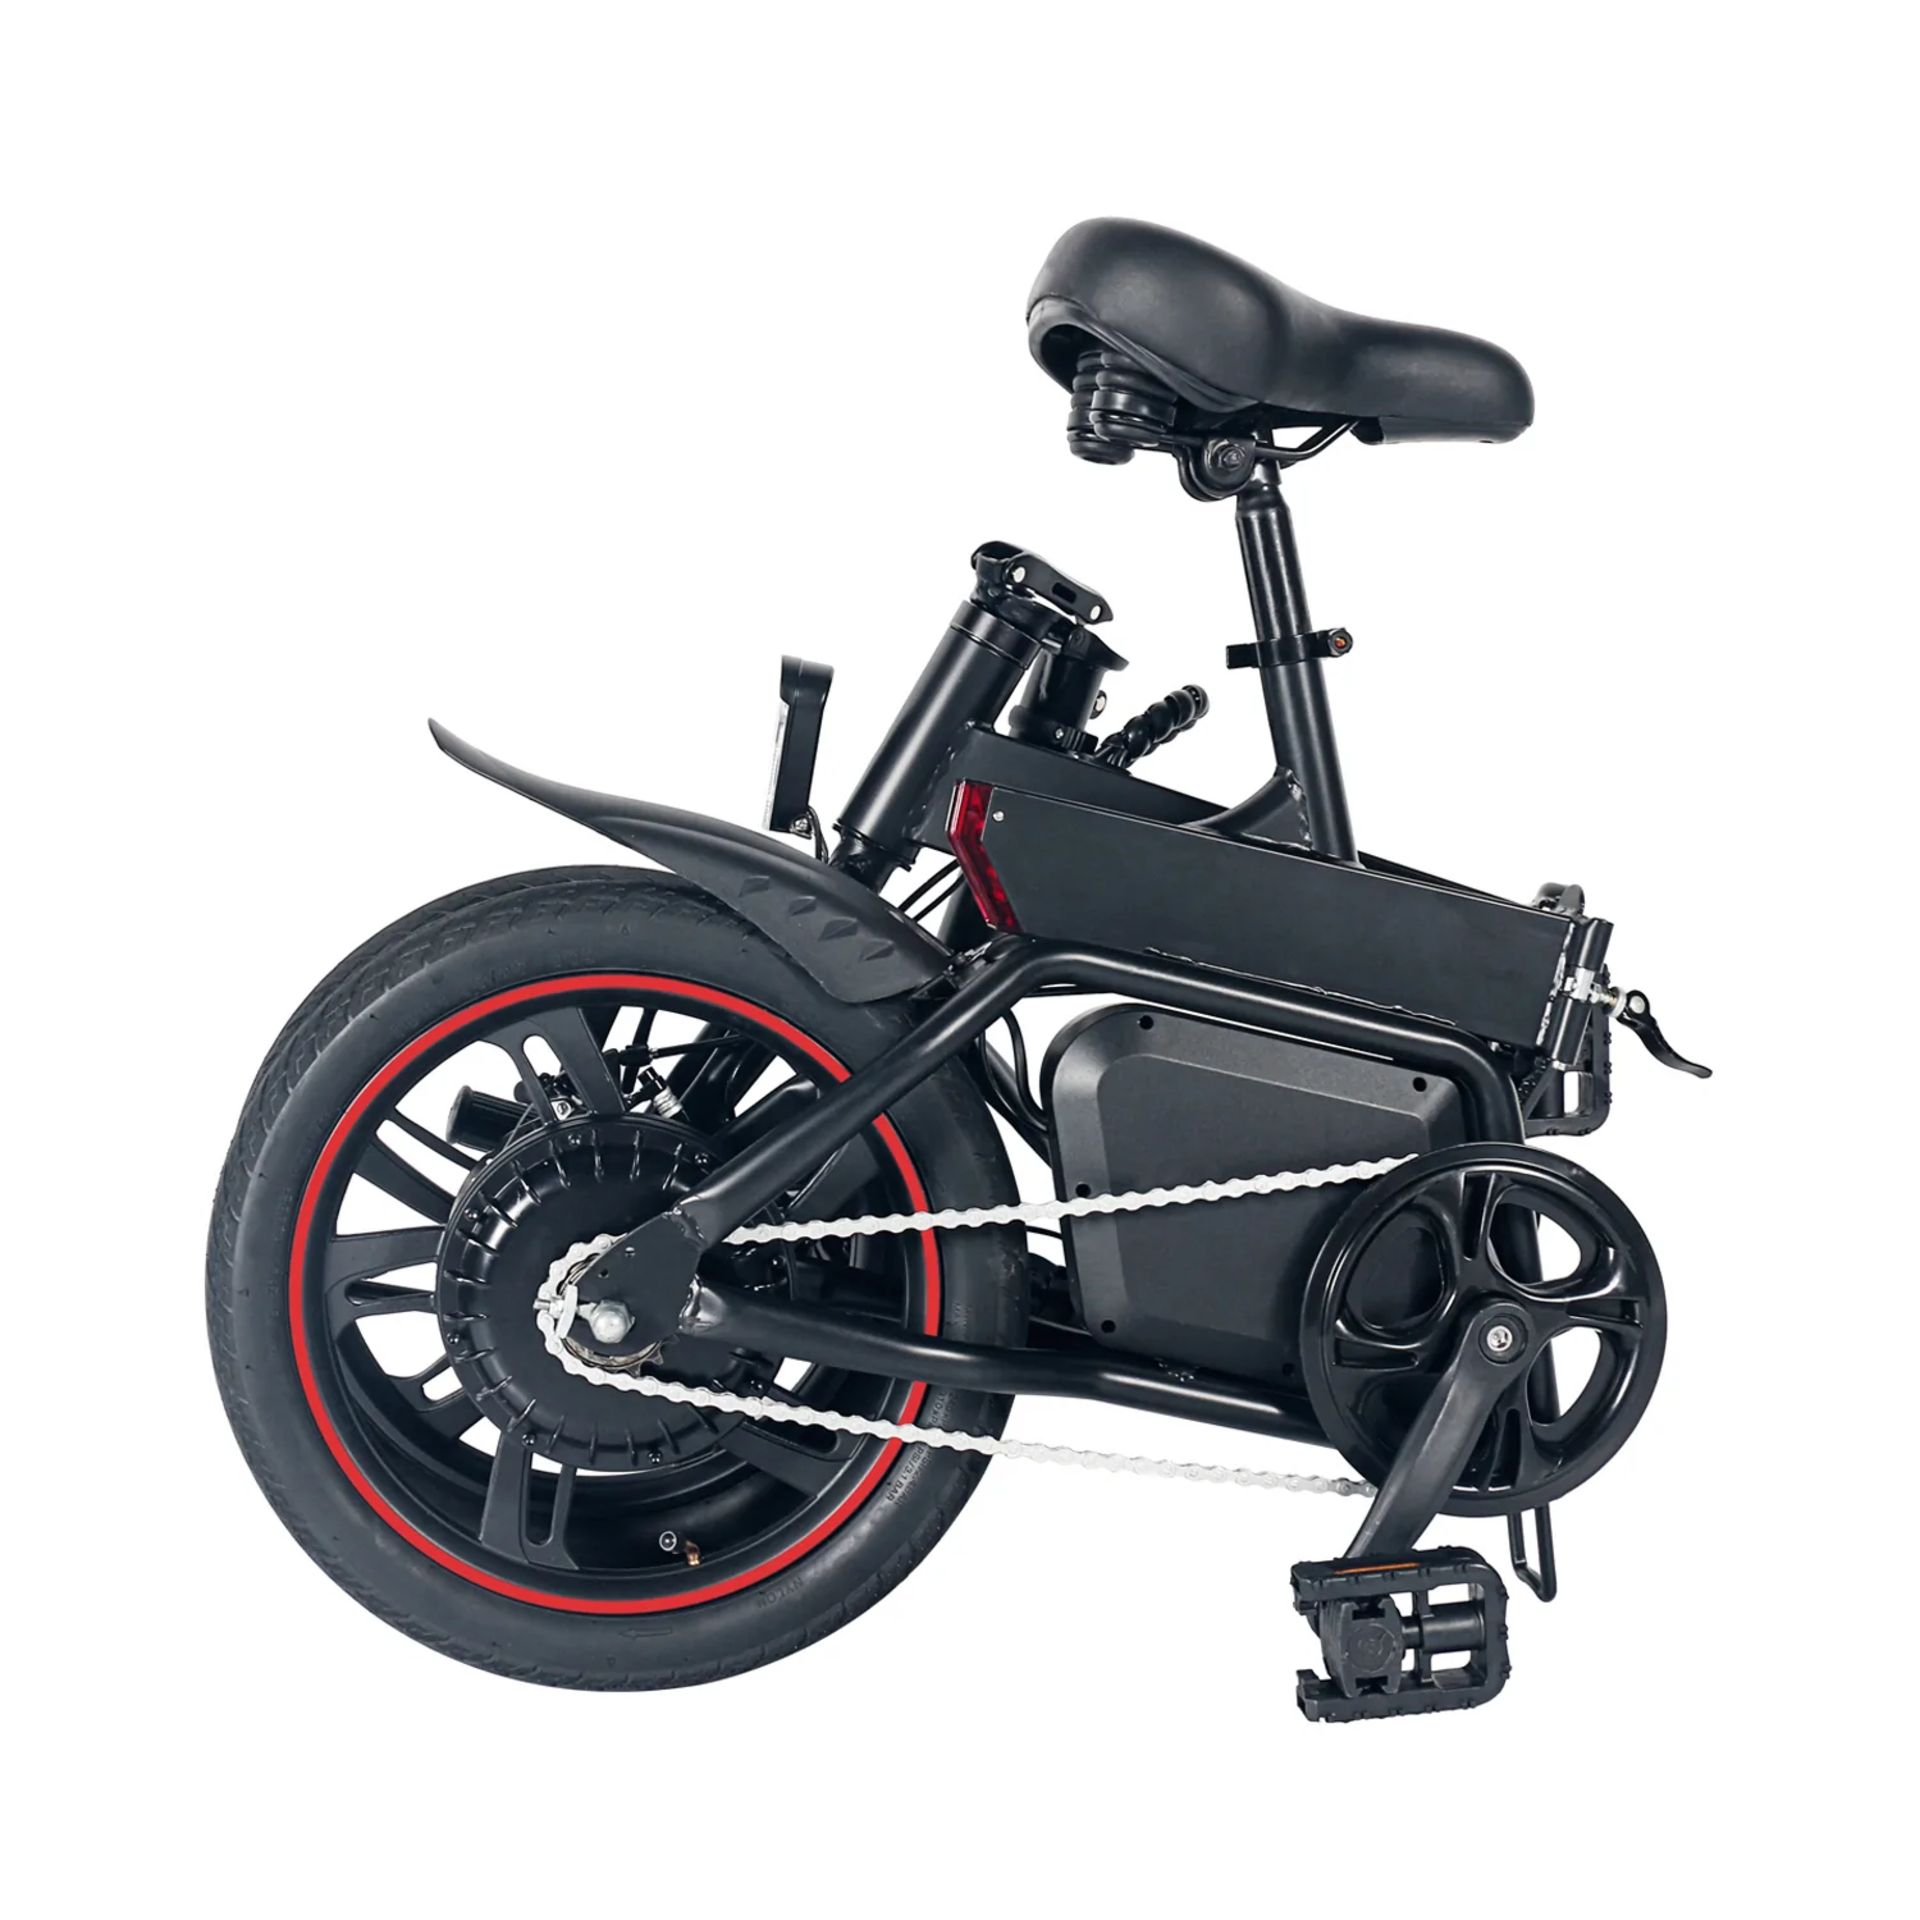 Windgoo B20 Pro Electric Bike. RRP £1,100.99. With 16-inch-wide tires and a frame of upgraded - Bild 2 aus 7